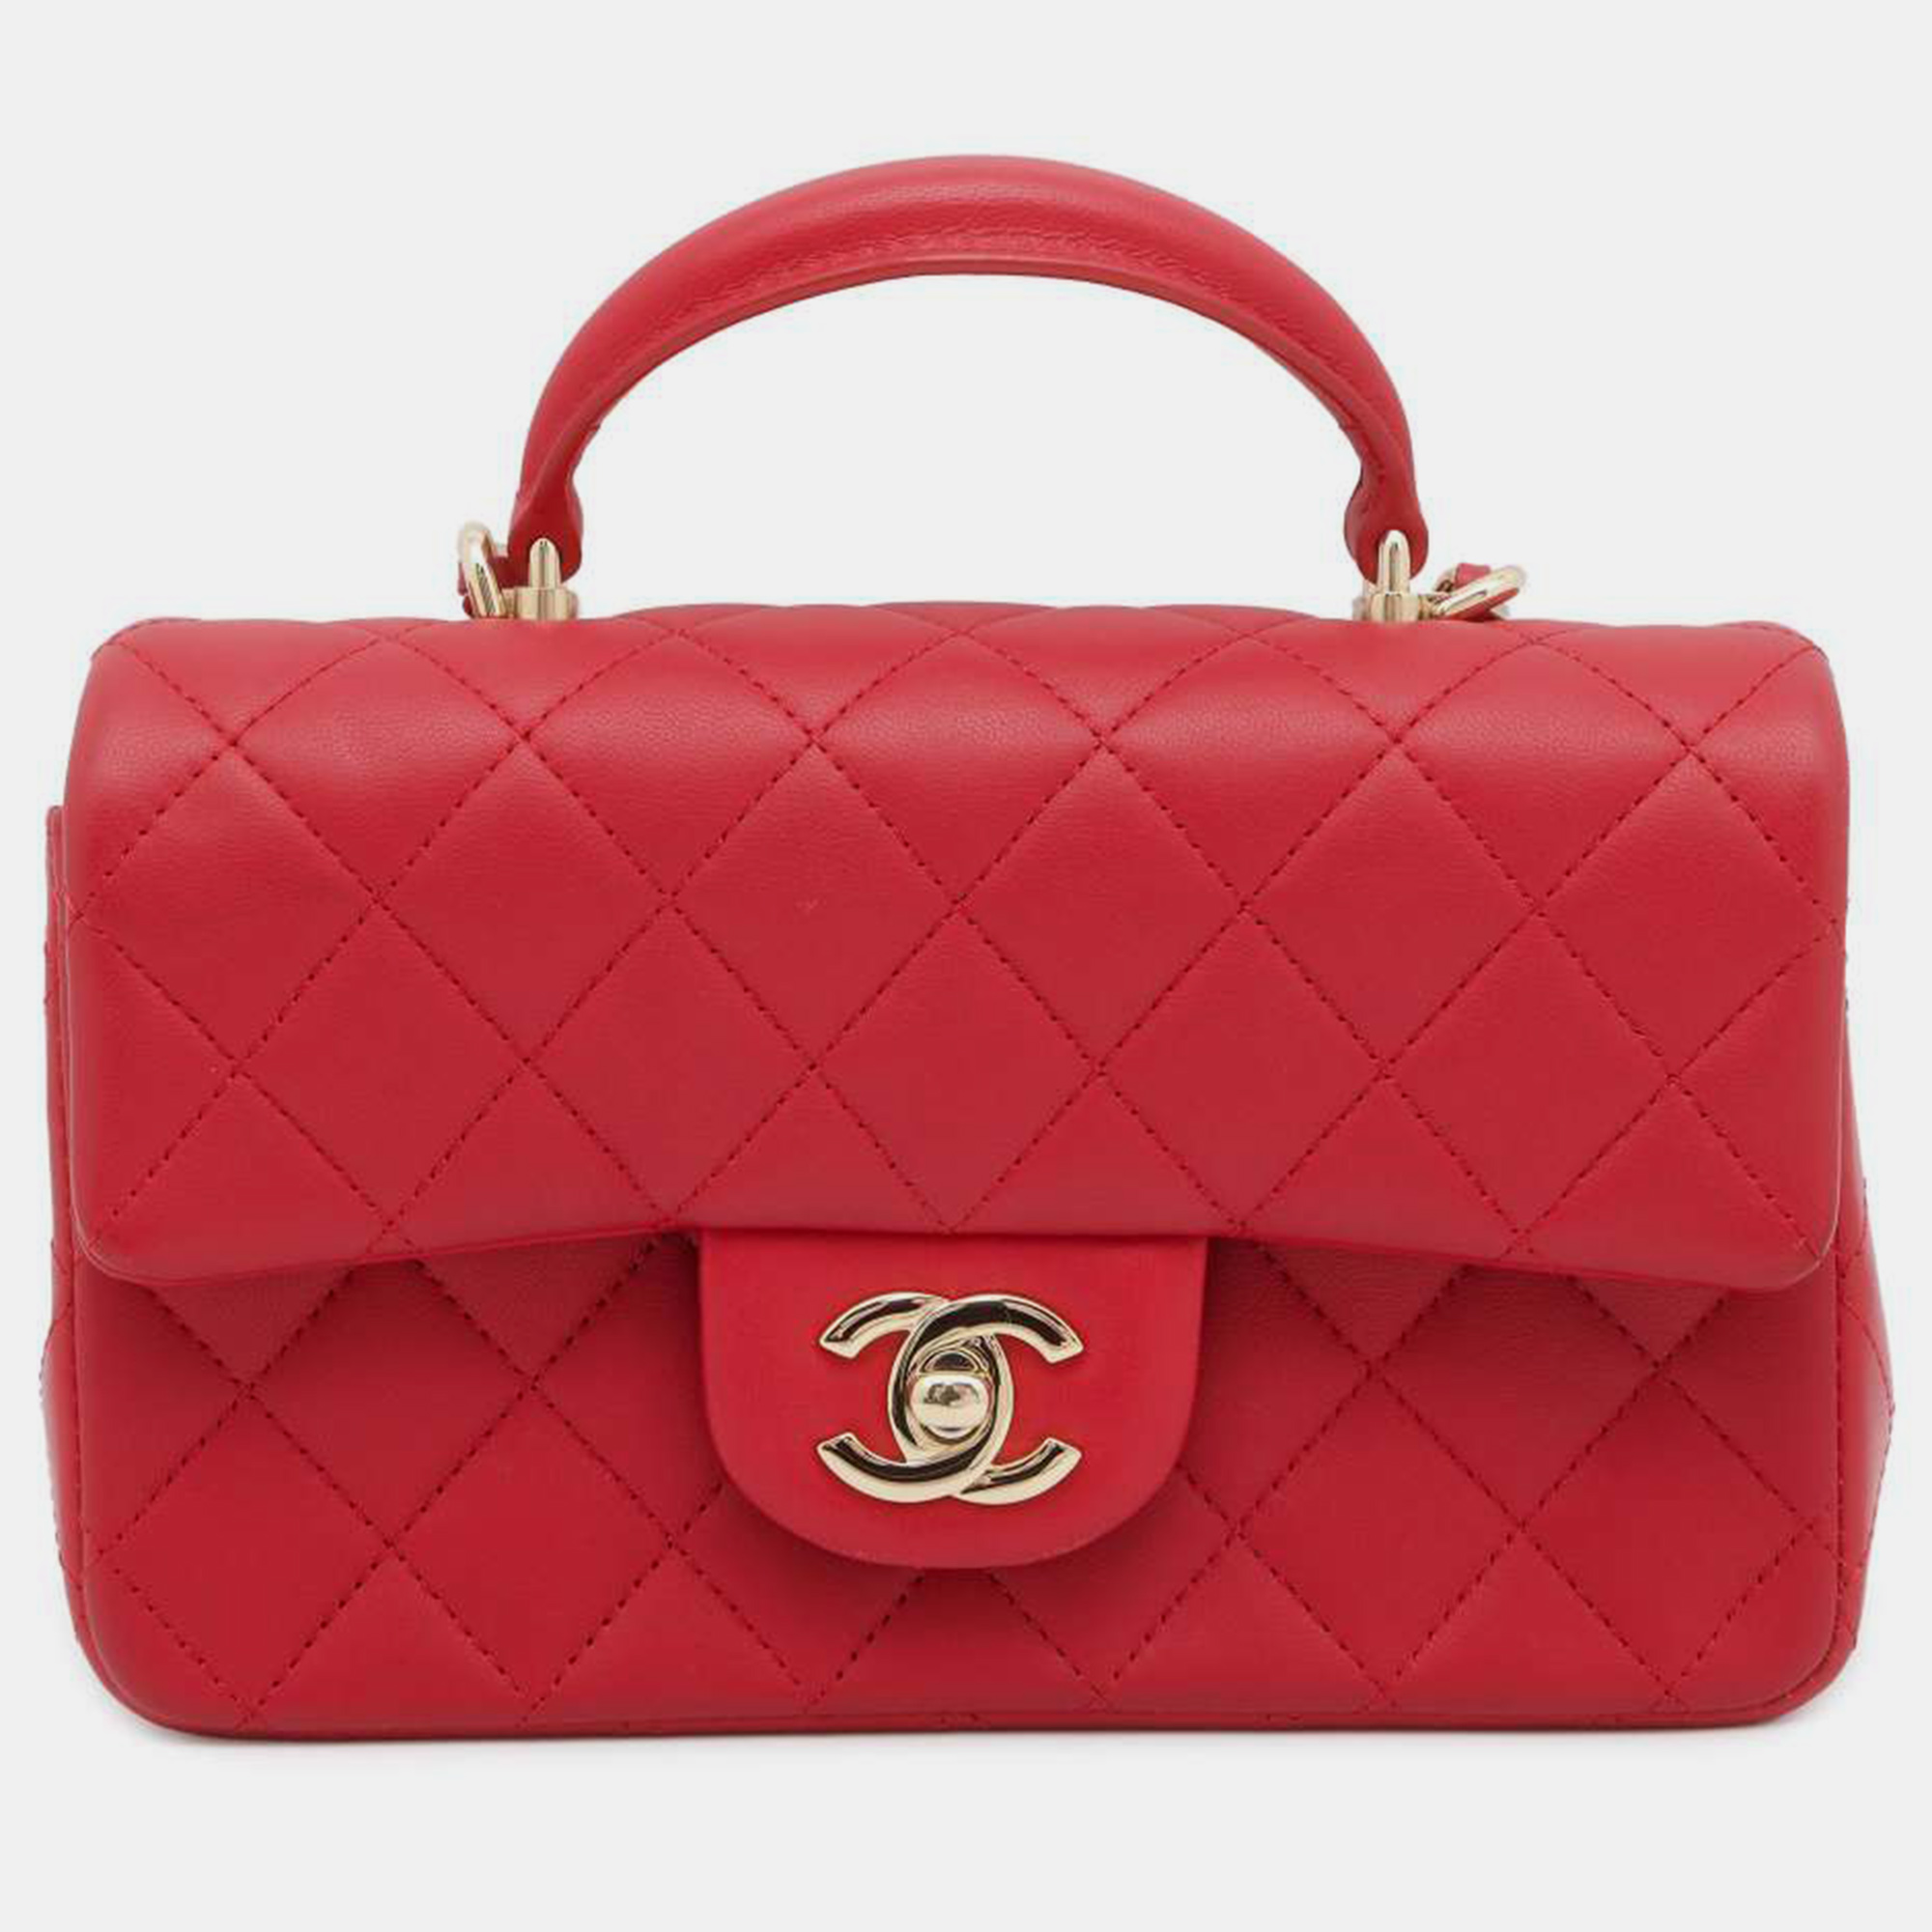 Chanel red leather top handle flap bag